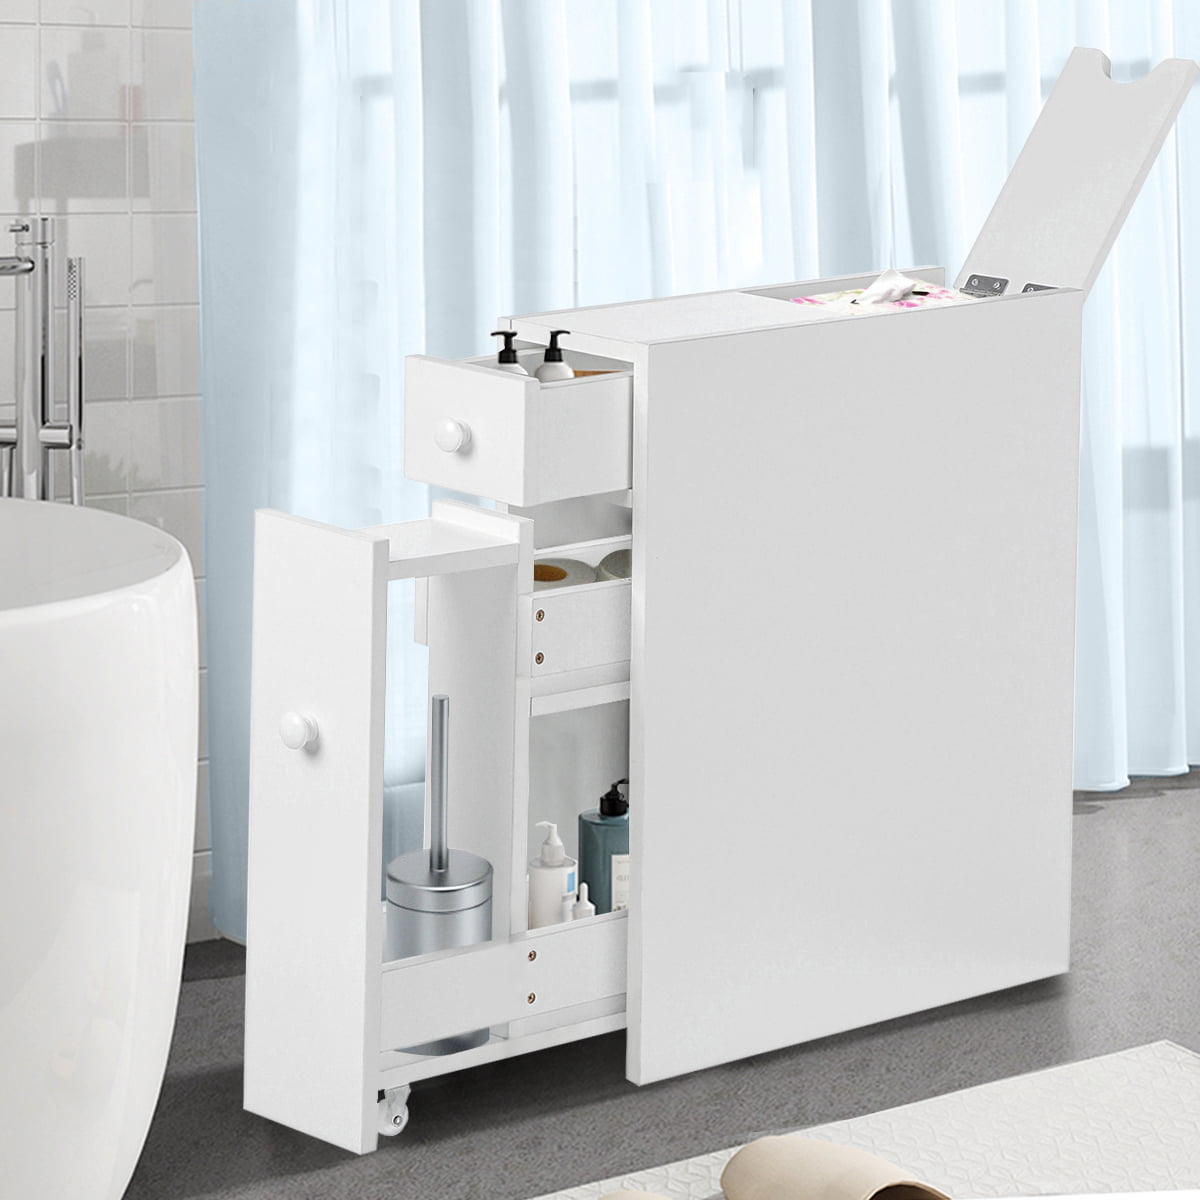 Details about   White Wooden Bathroom Floor Cabinet Storage Cupboard W/ Shelves Free Stand 